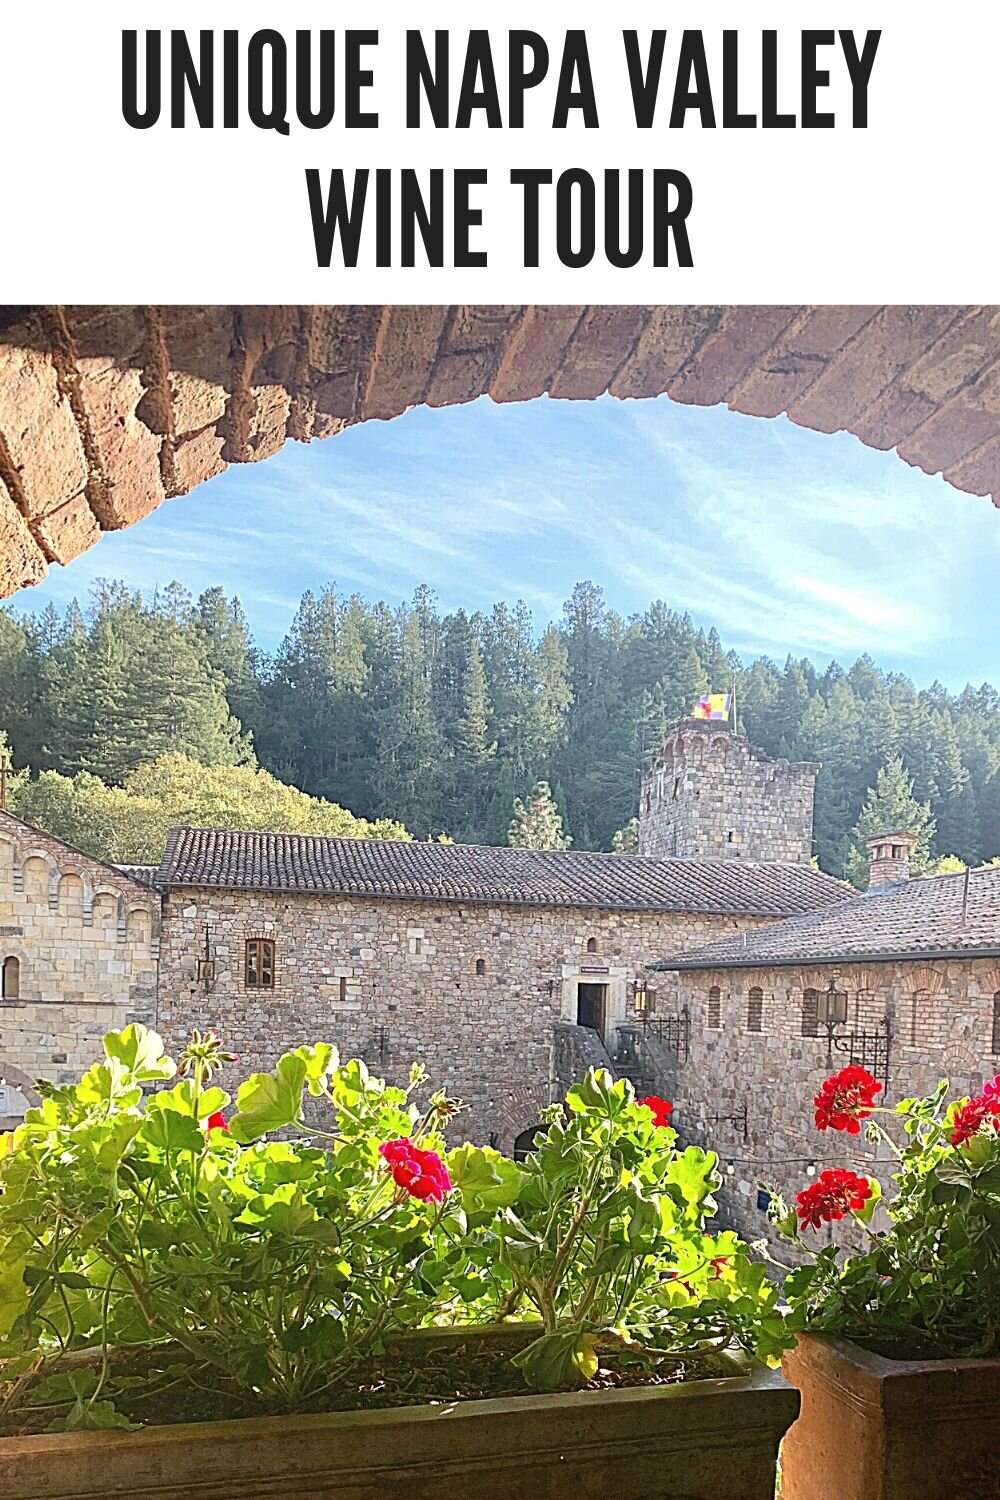 San Francisco Napa and Sonoma private wine tour with friends. Everything you need to know about the wine tour from San Francisco including top wineries to visit including a castle winery! #napavalley #winetasting #sonoma #winetour #napa